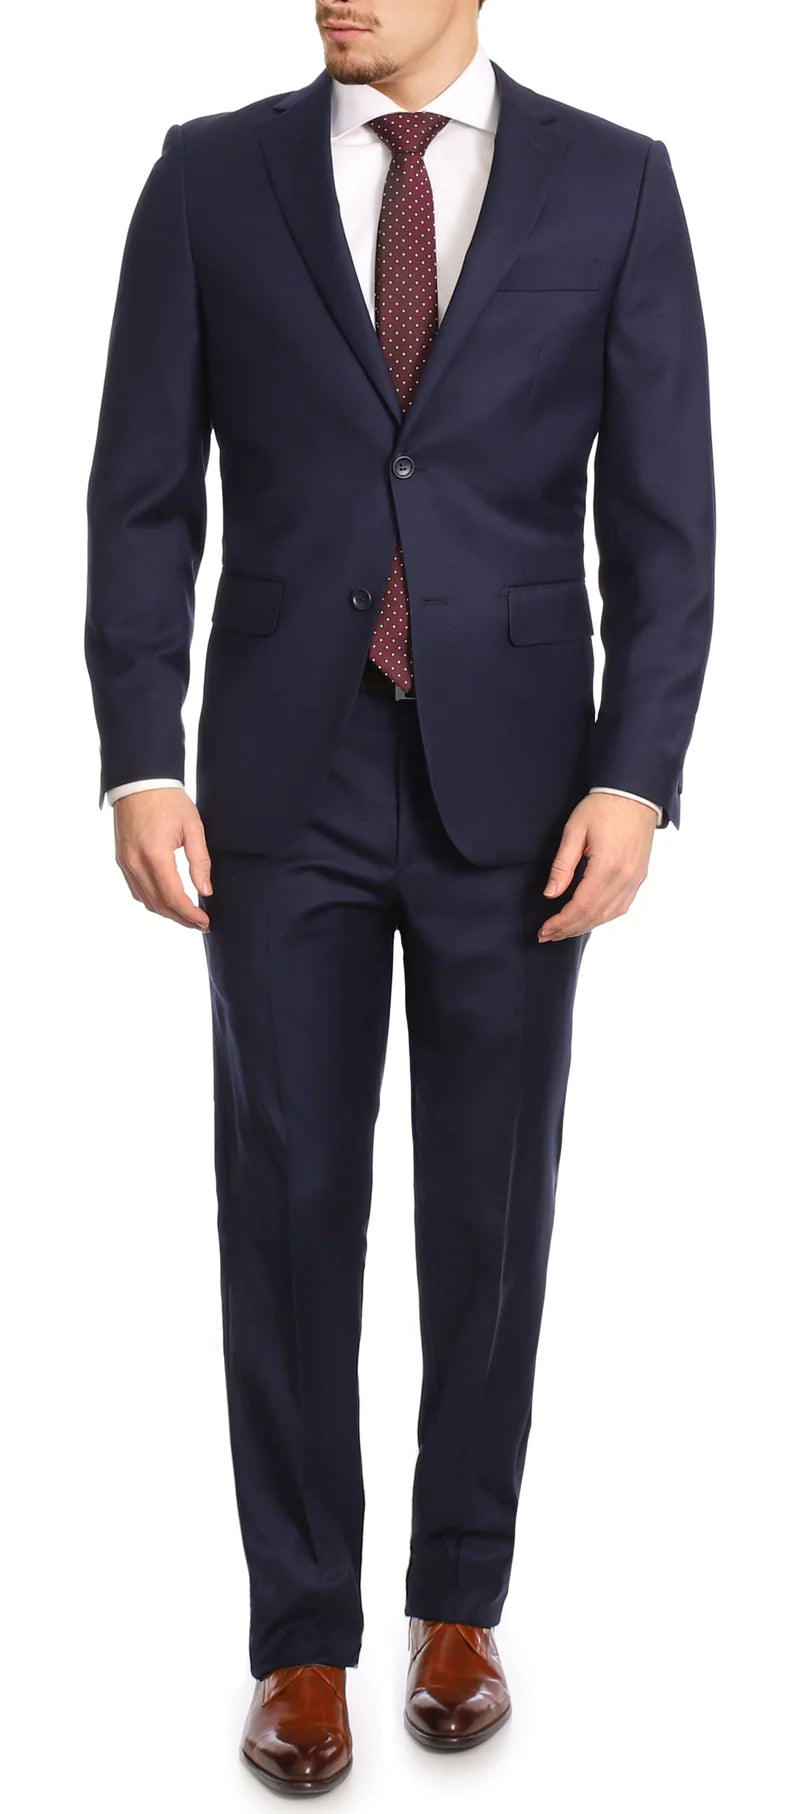 How Should Guys Dress for a Friend's Wedding?